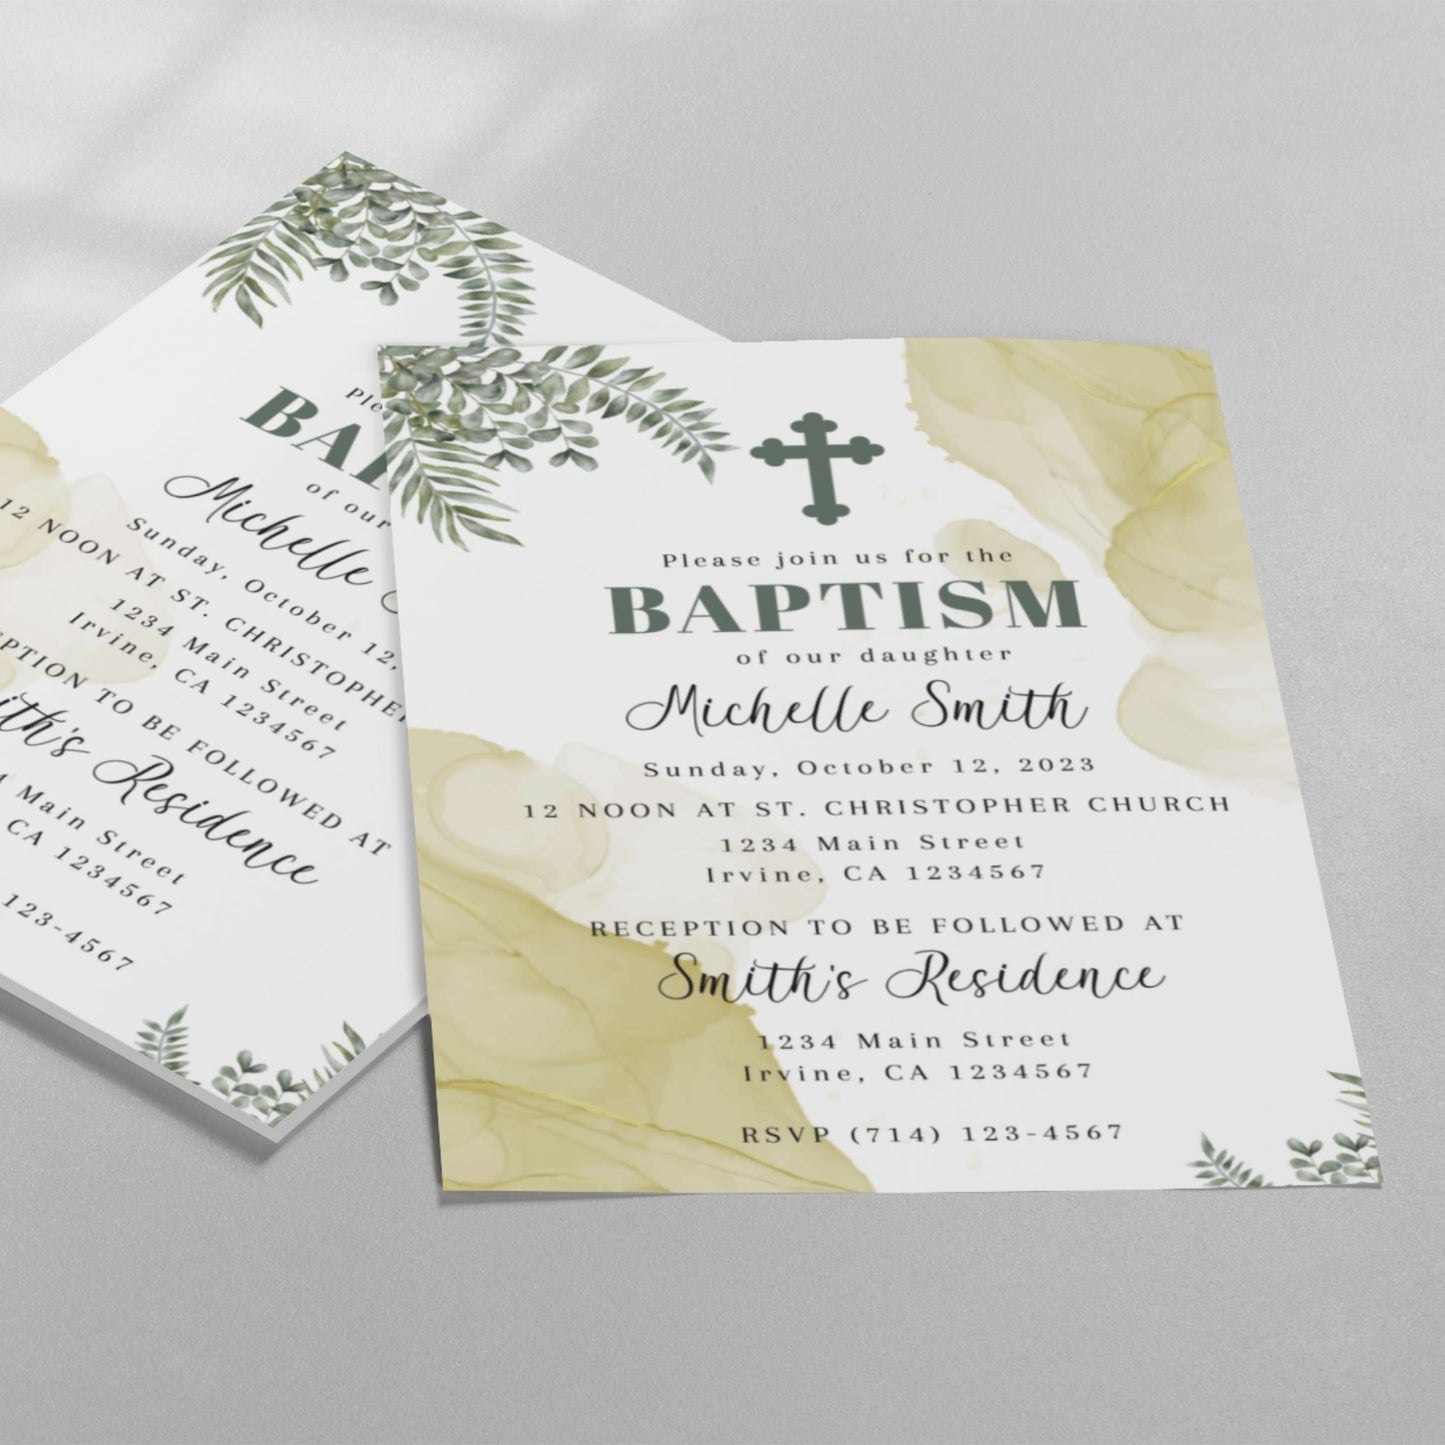 Baptism Invitation Template for a Girl